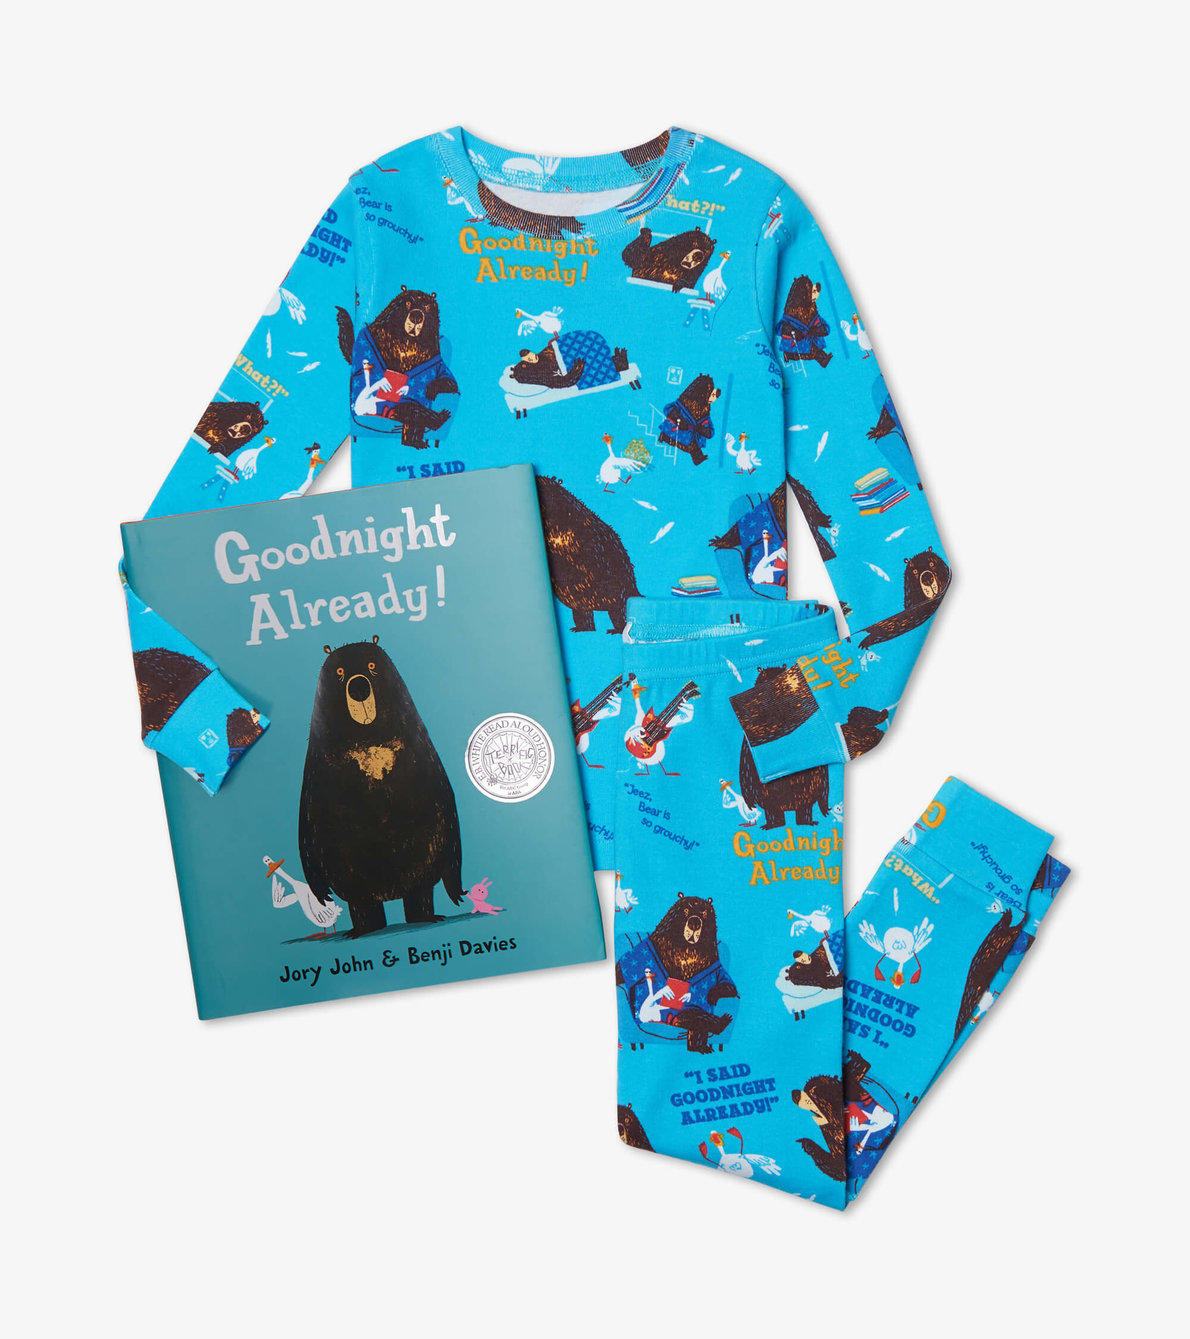 View larger image of Goodnight Already Book and Pajama Set